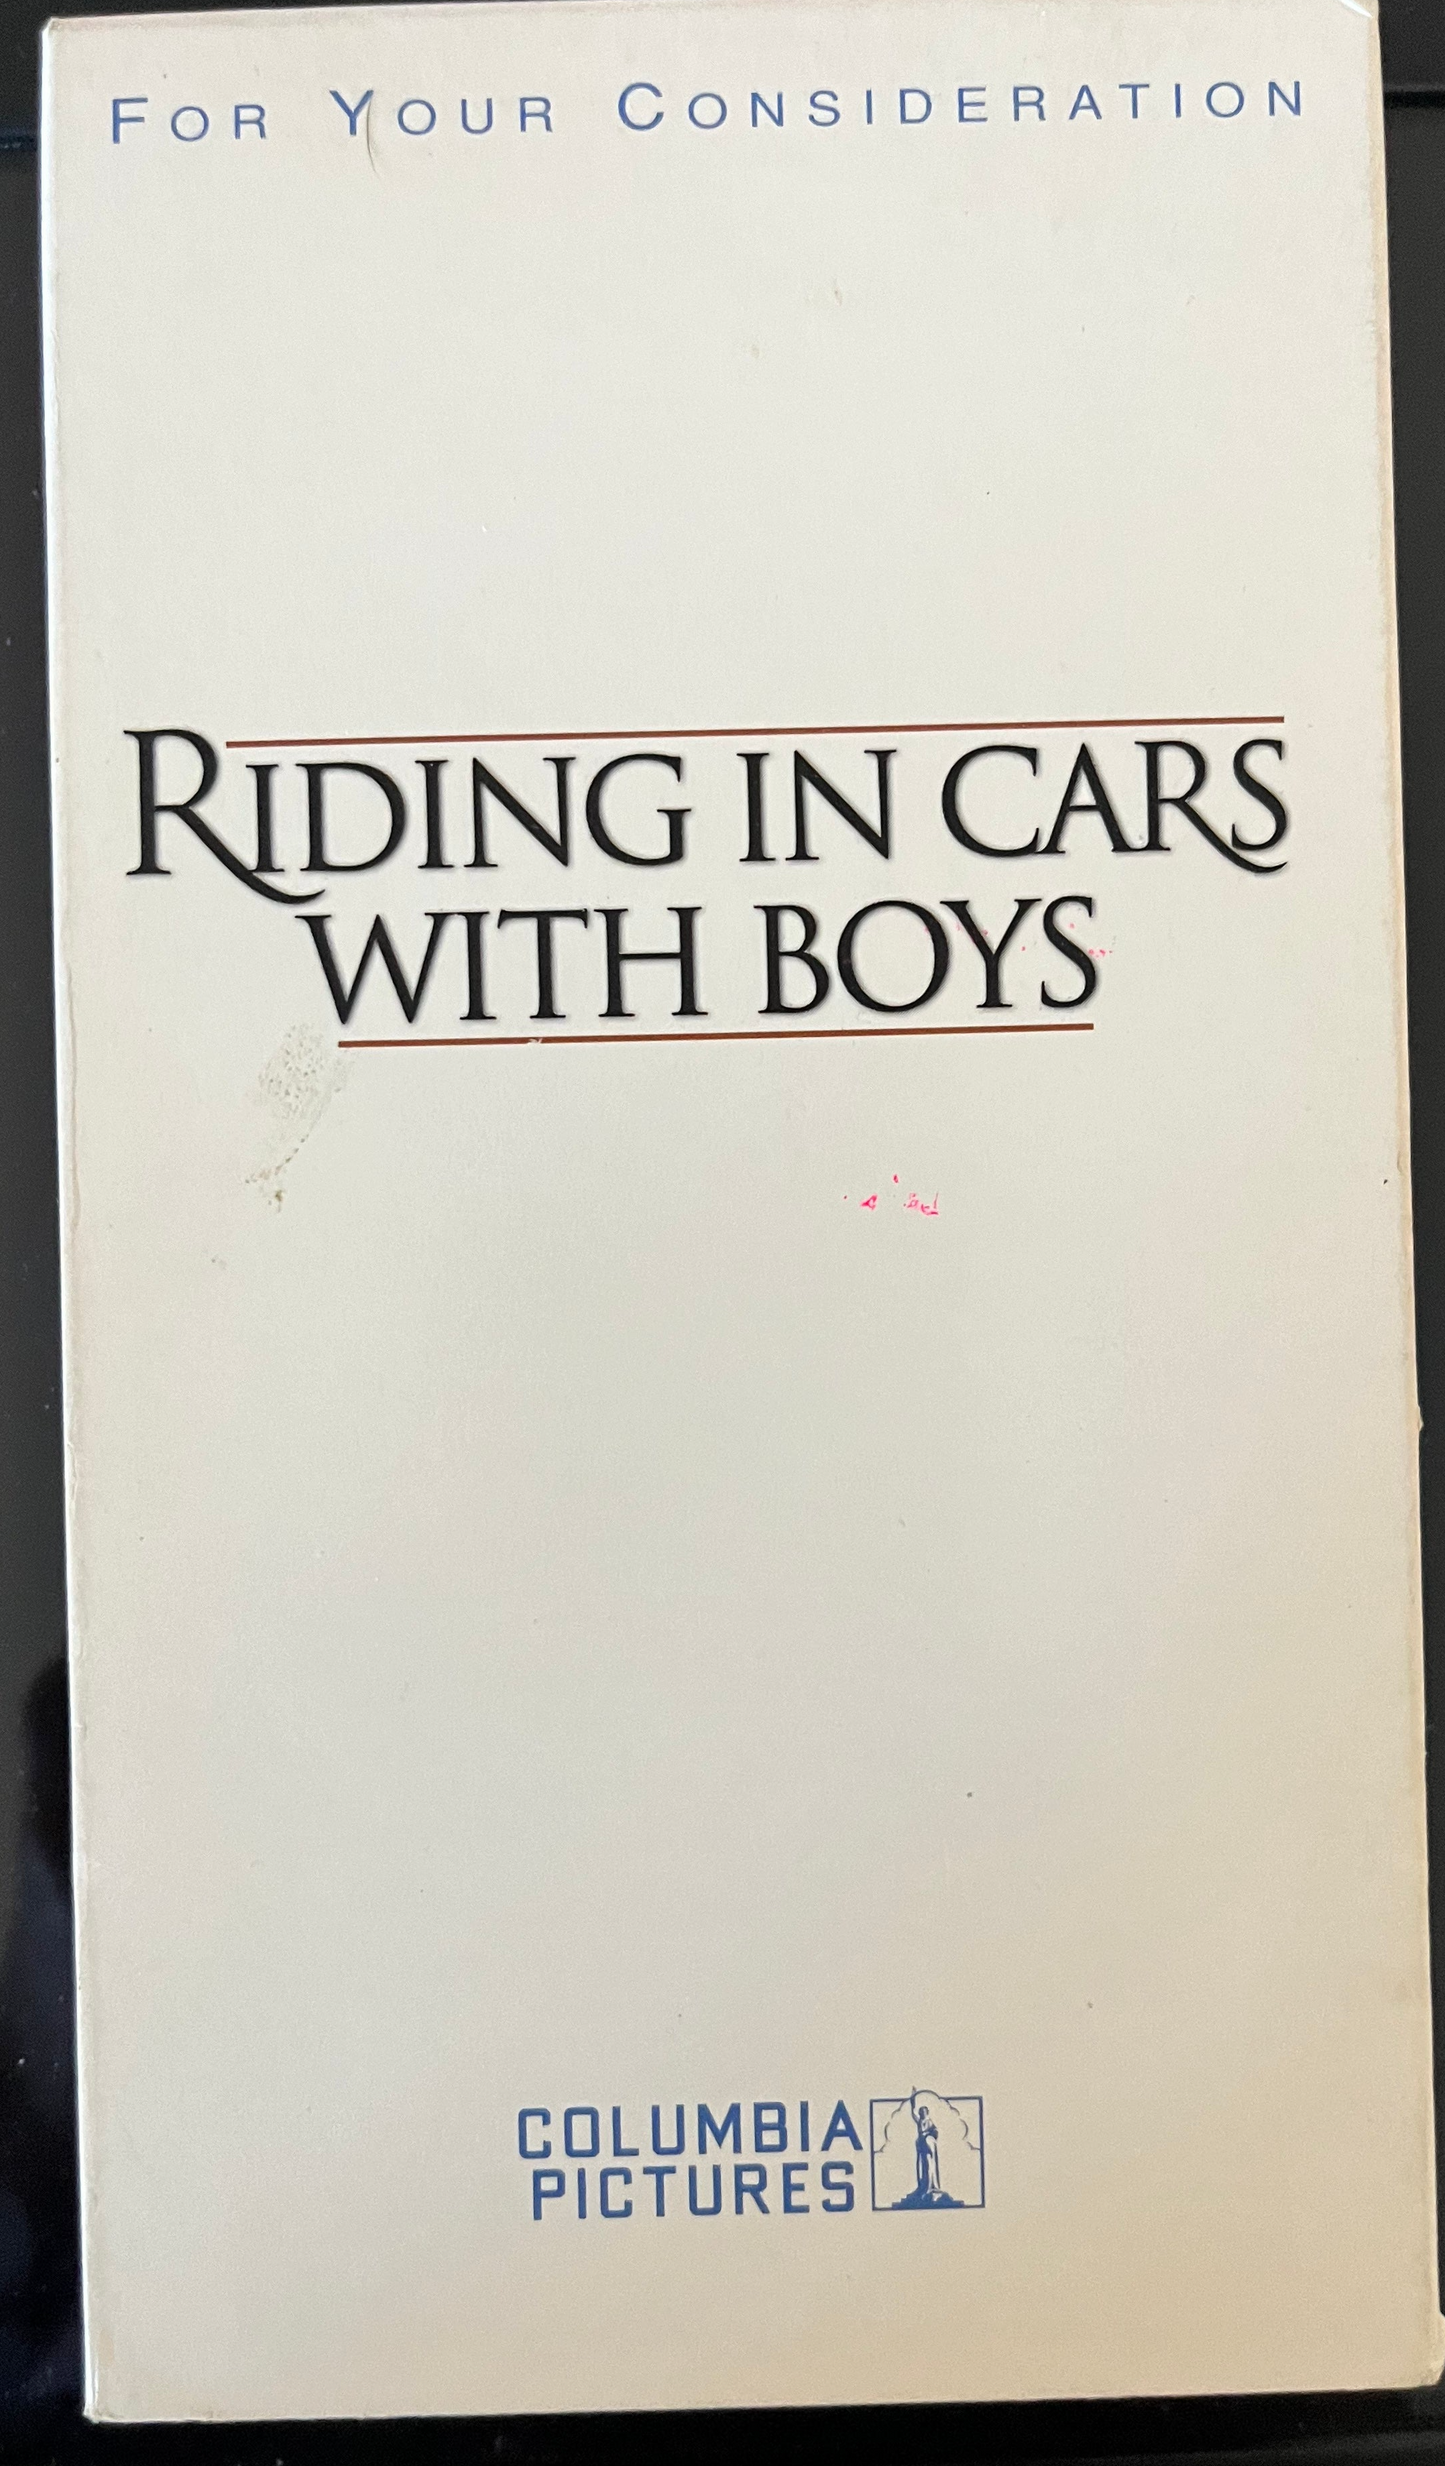 Riding In Cars With Boys - RARE VHS Screener - Drew Barrymore / Brittany Murphy